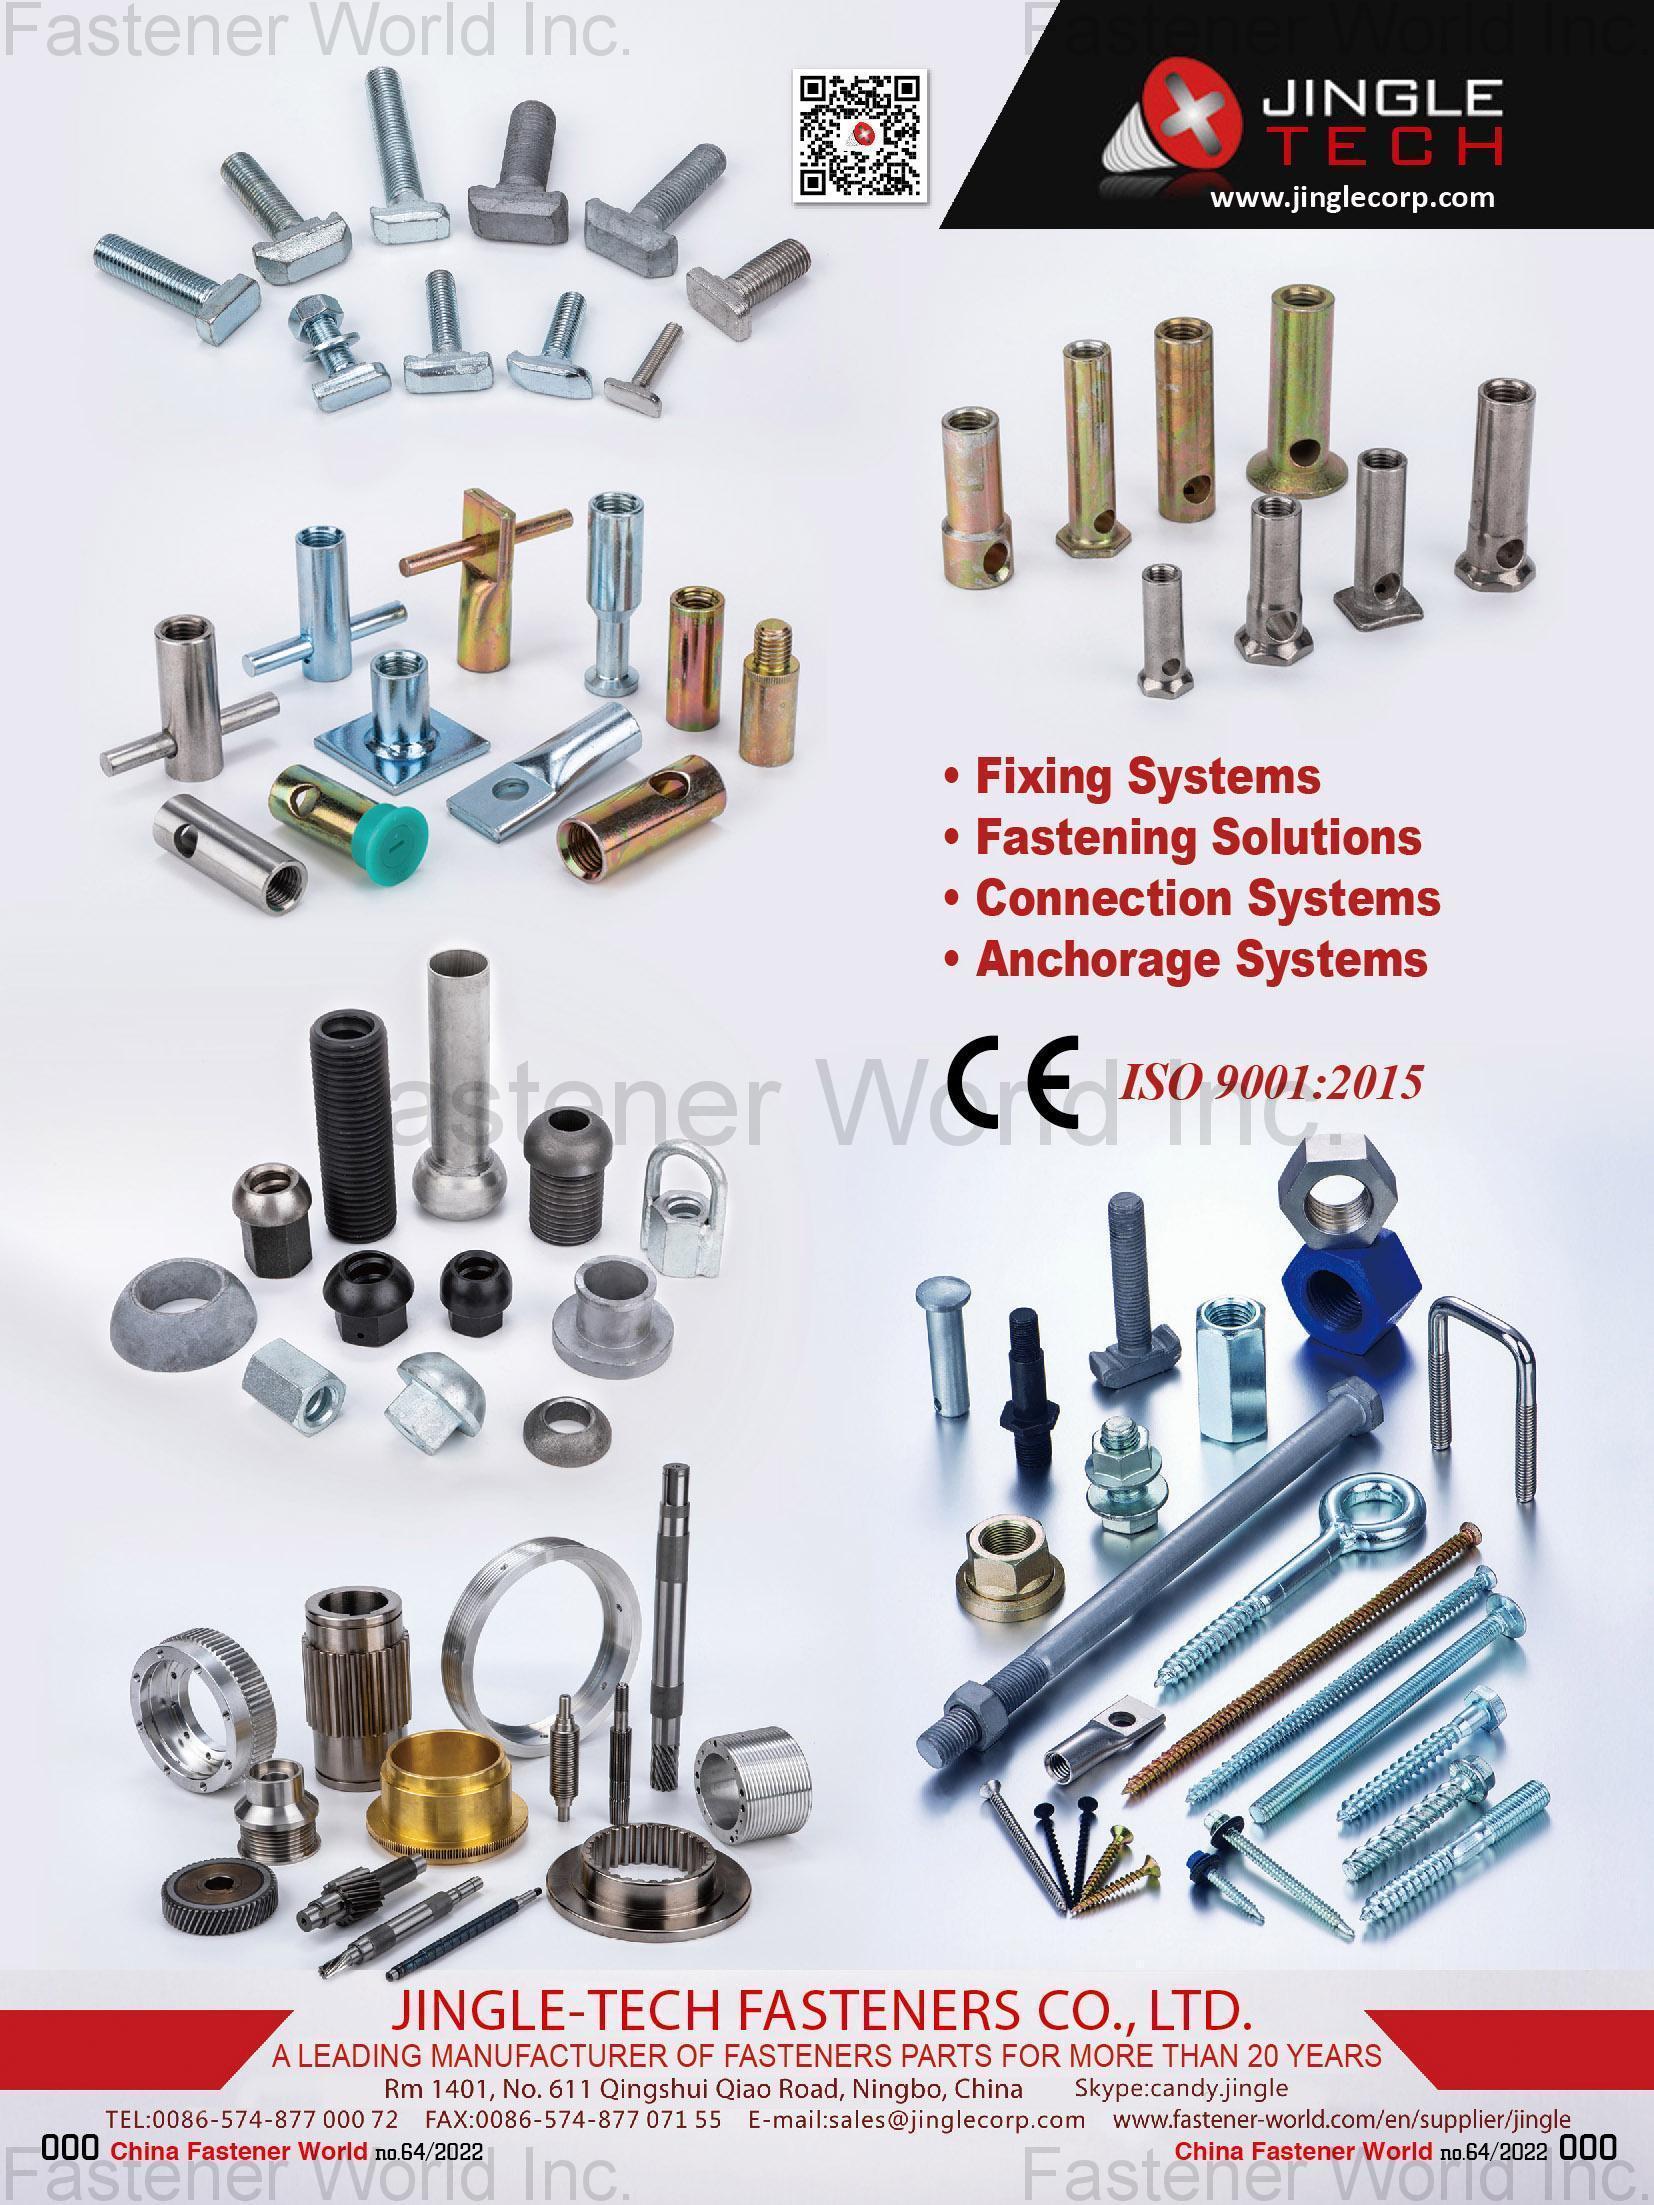 JINGLE-TECH FASTENERS CO., LTD. , Fixing Systems, Fastening Solutions, Connection Systems, Anchorage Systems